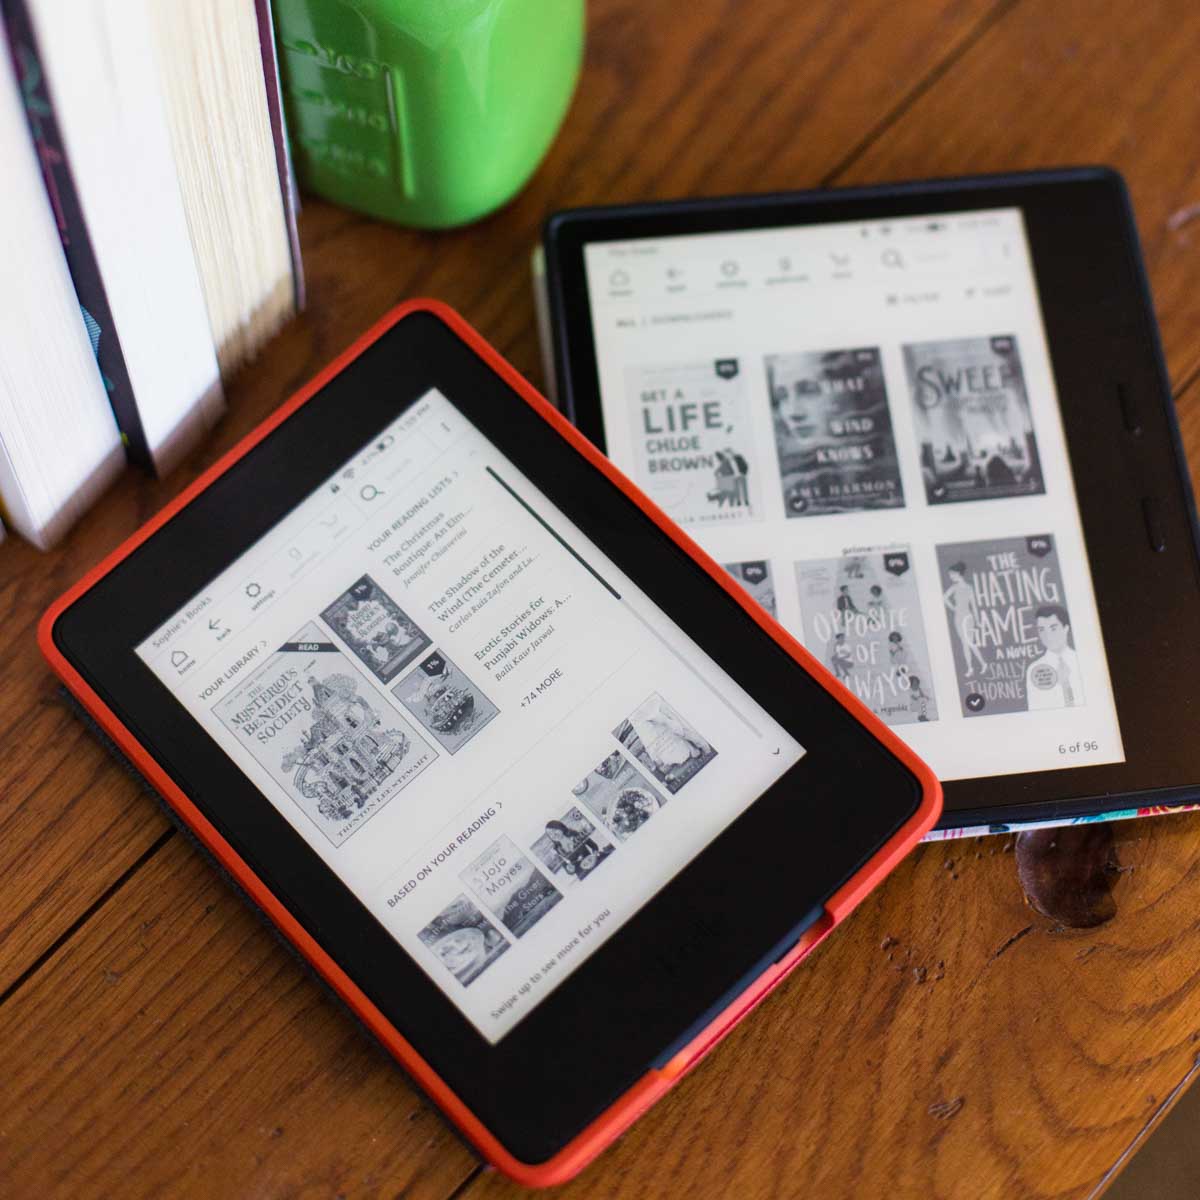 Two kindles sitting side by side to show the screen size difference.